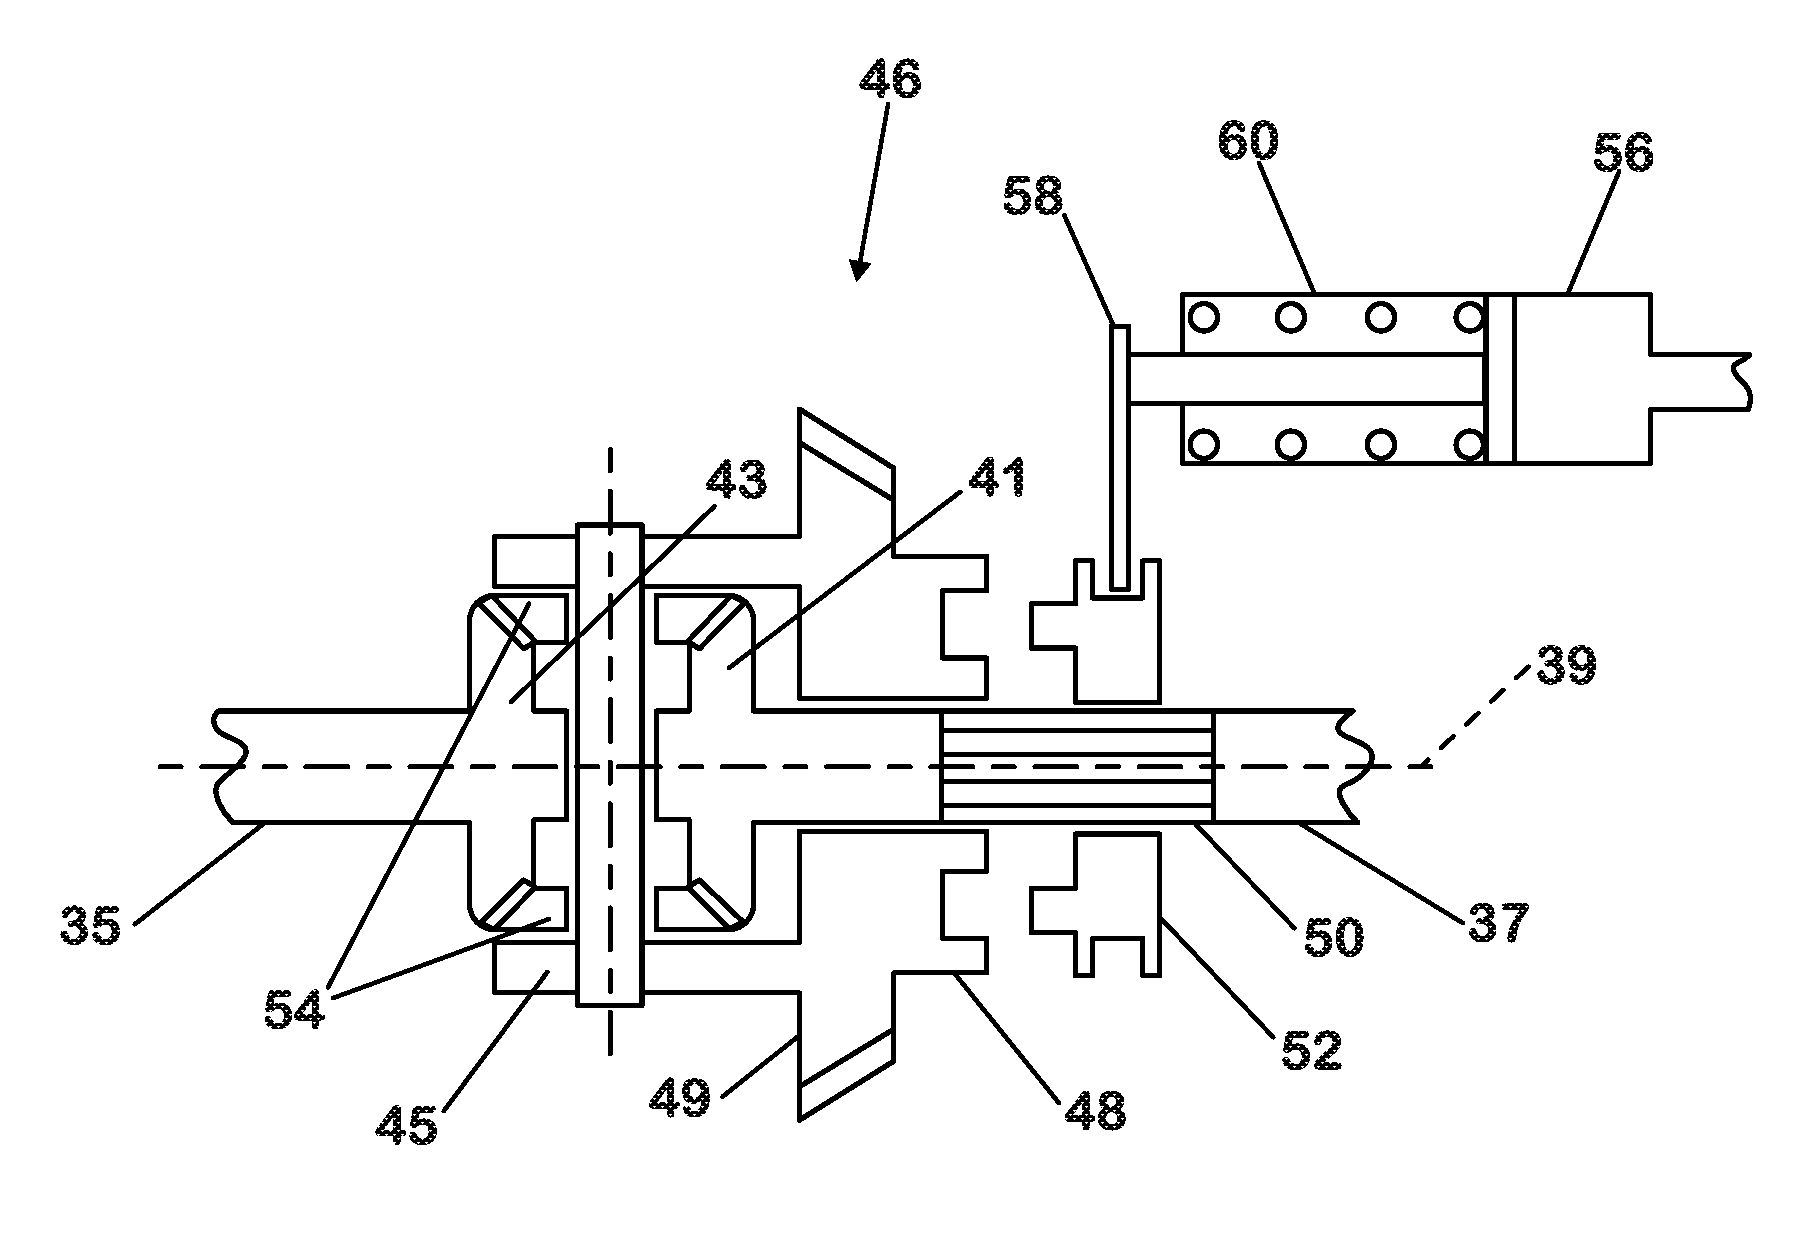 Automated differential lock